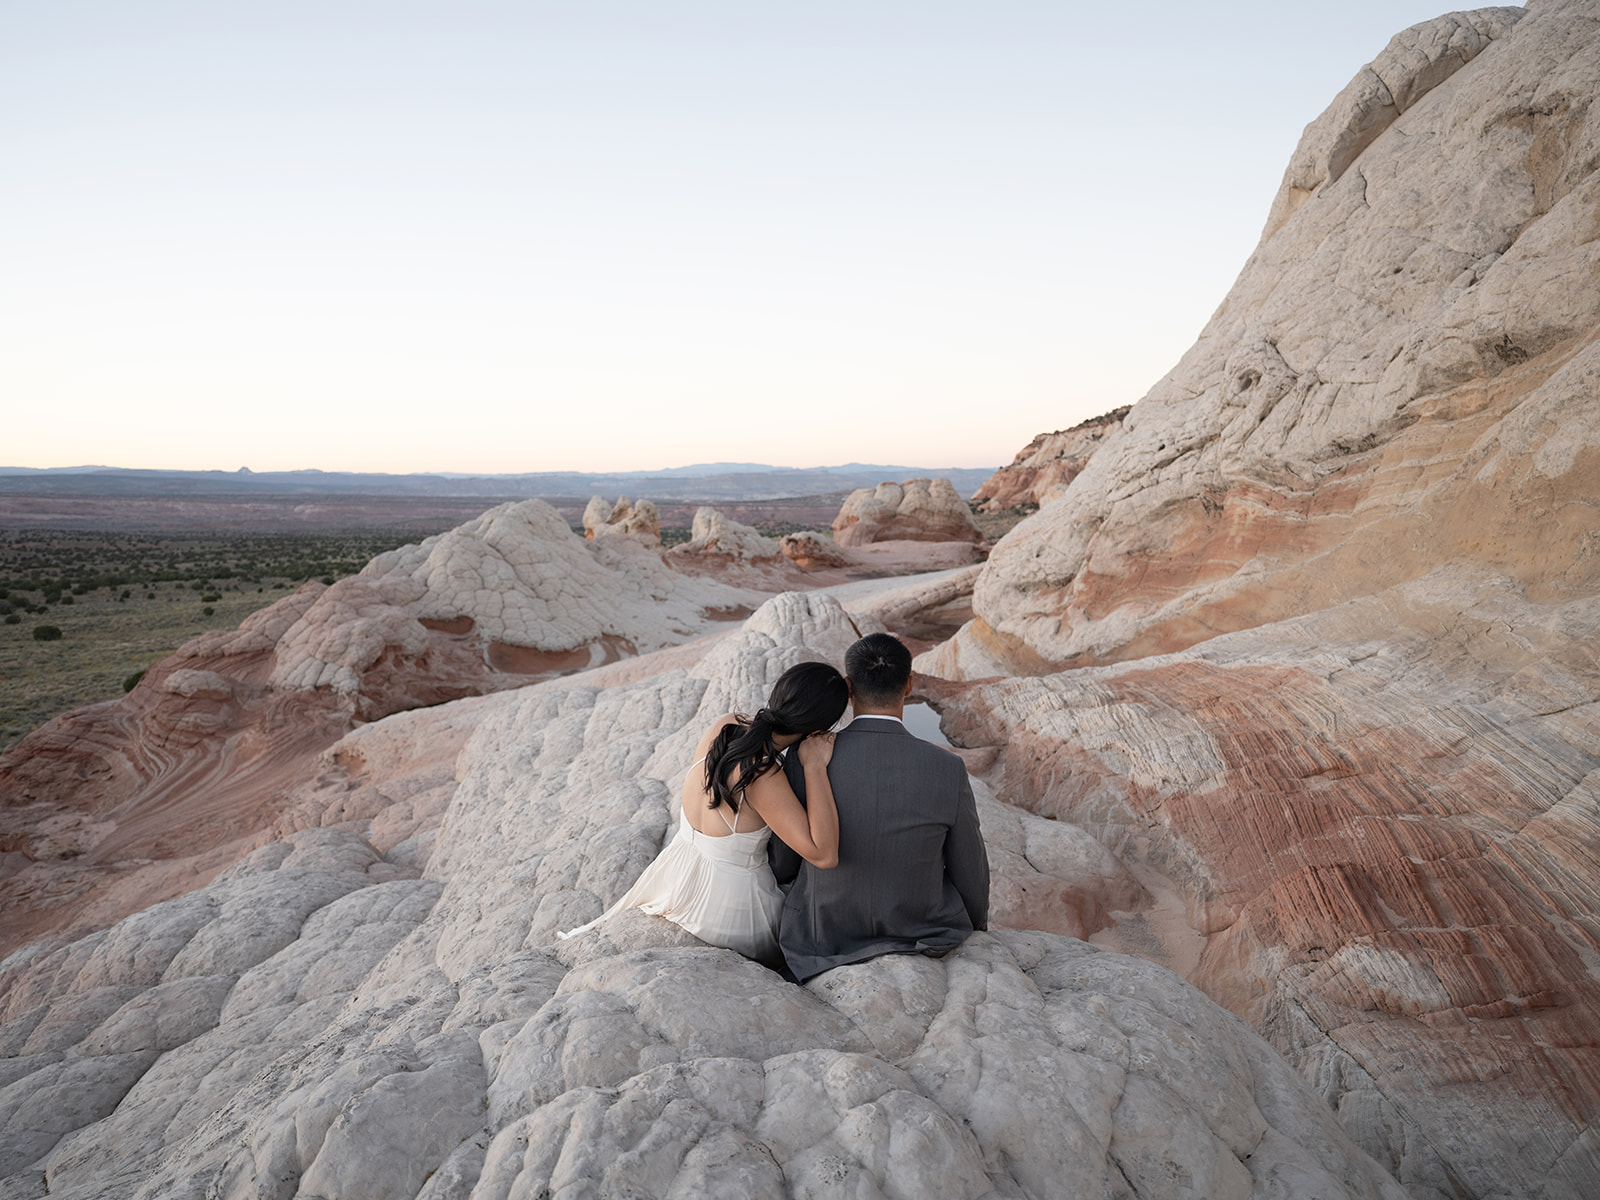 Eloping in the secluded and remote location of White Pocket, Arizona with beautiful views of the Vermilion Cliffs